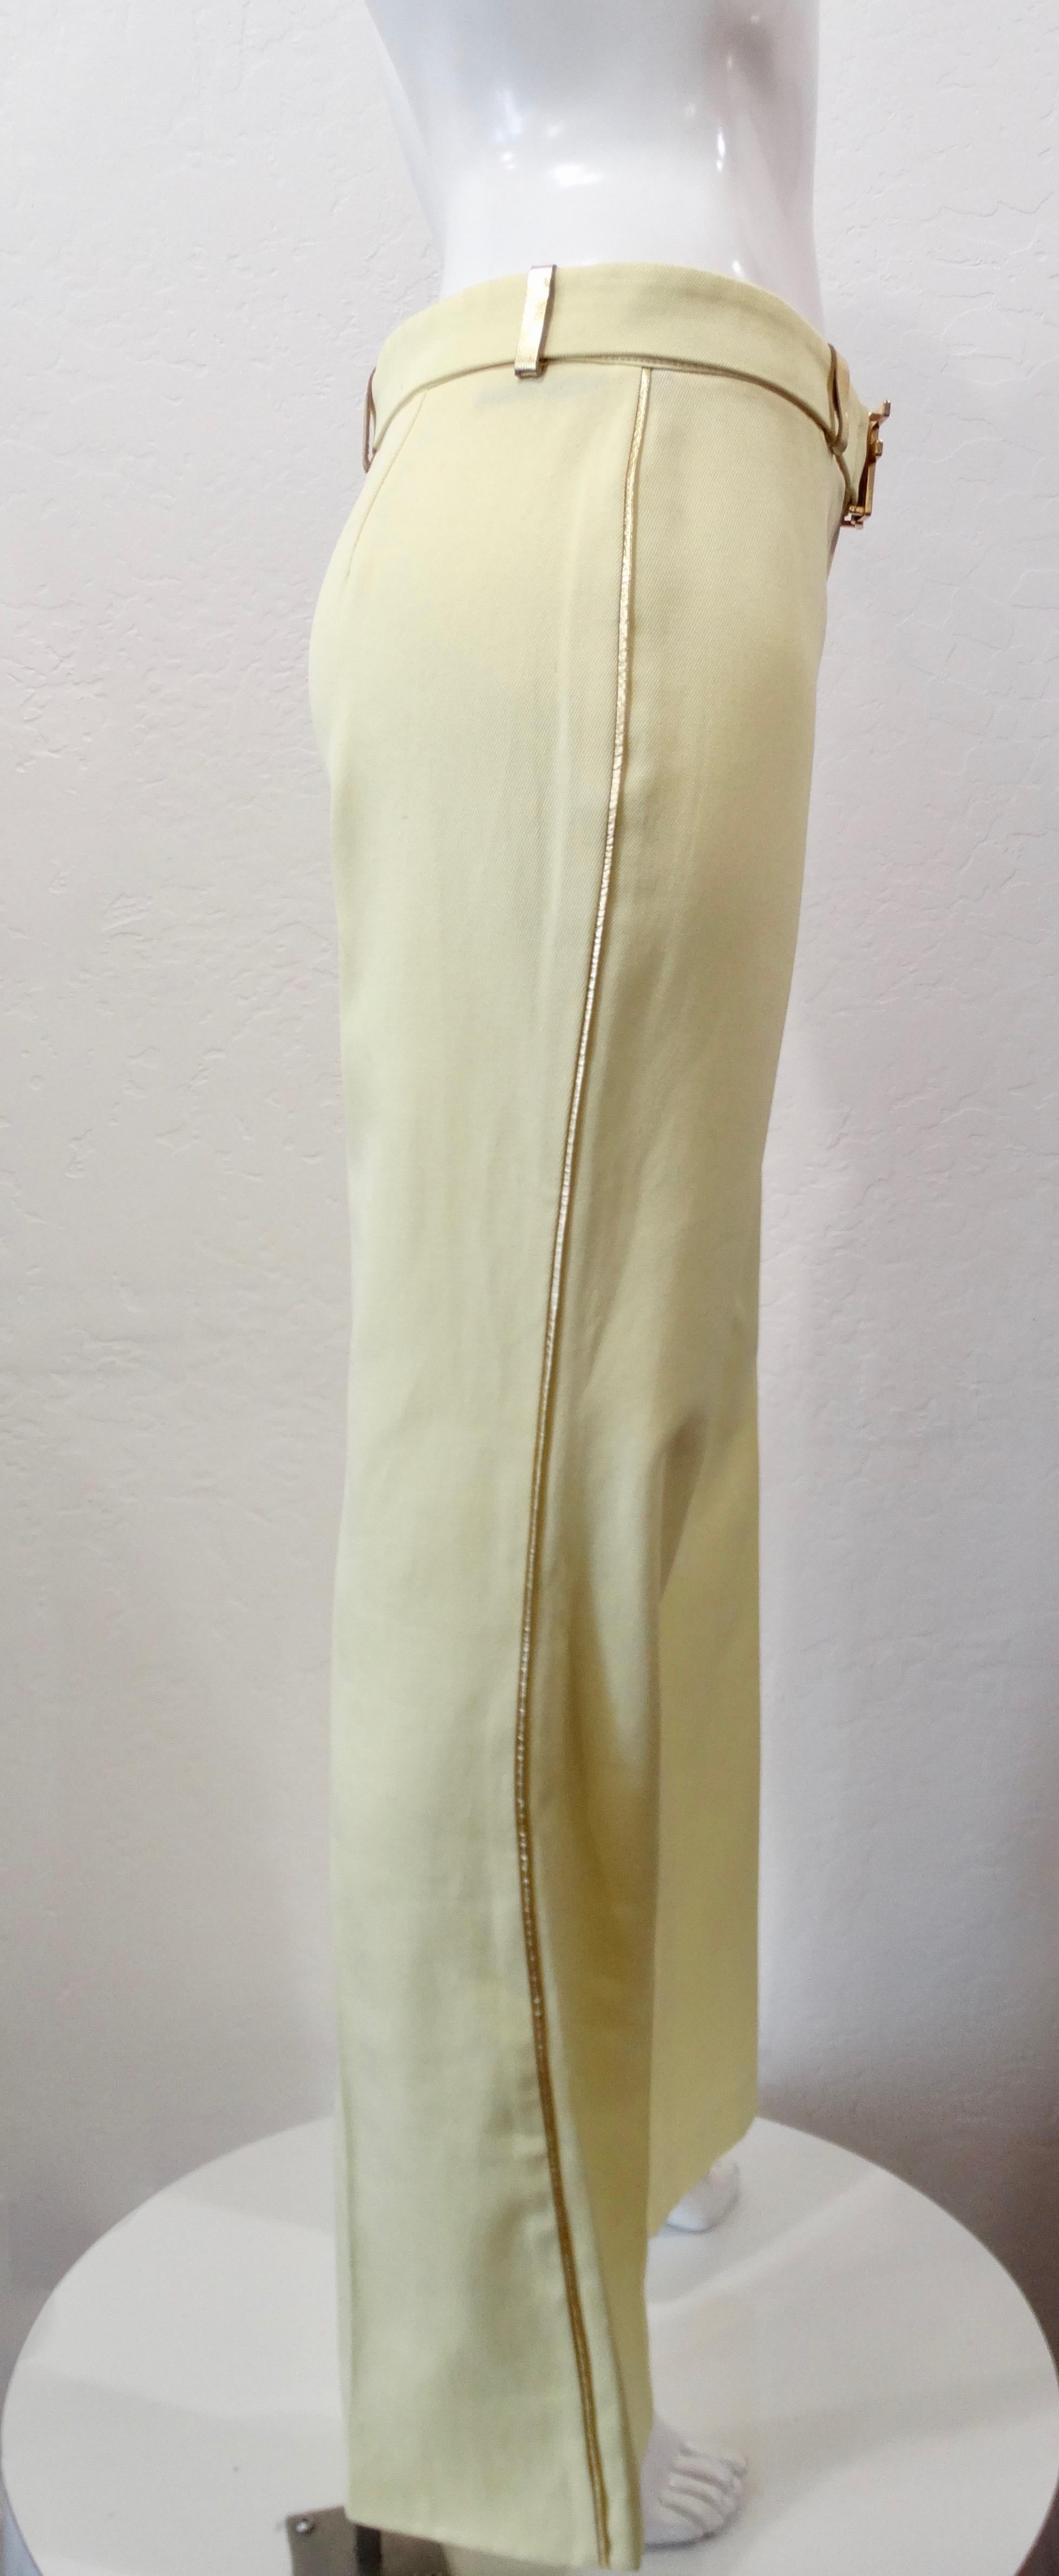 Add a little color to your wardrobe with these amazing Fendi slacks! Circa 1990s, these pants are a soft pastel yellow color and feature gold metallic leather piping down the sides and on the belt loops. Includes a tonal belt with a Fendi logo